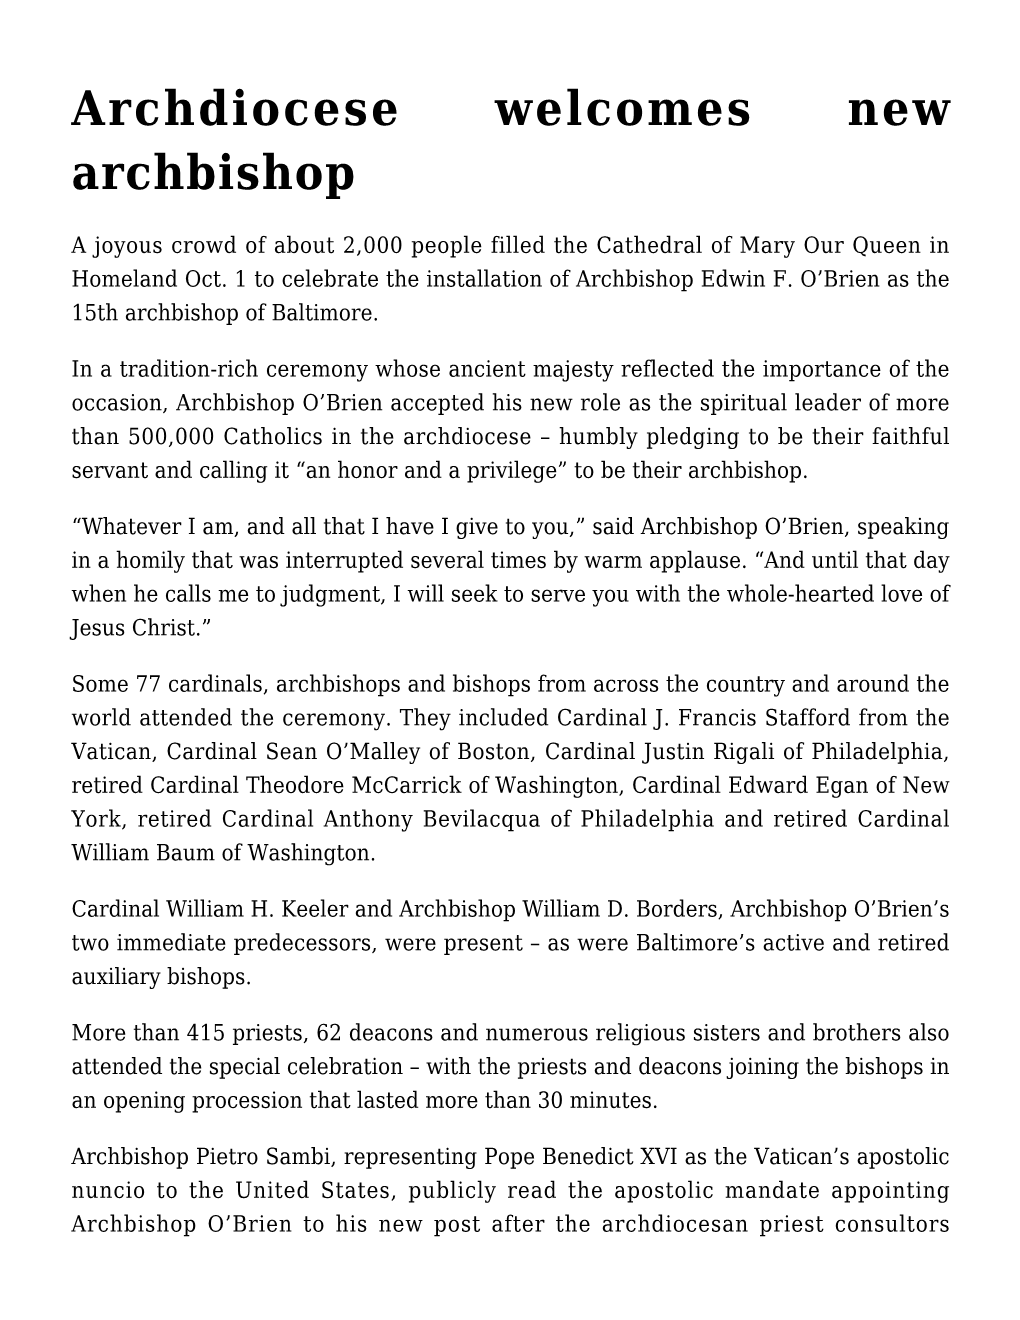 Archdiocese Welcomes New Archbishop